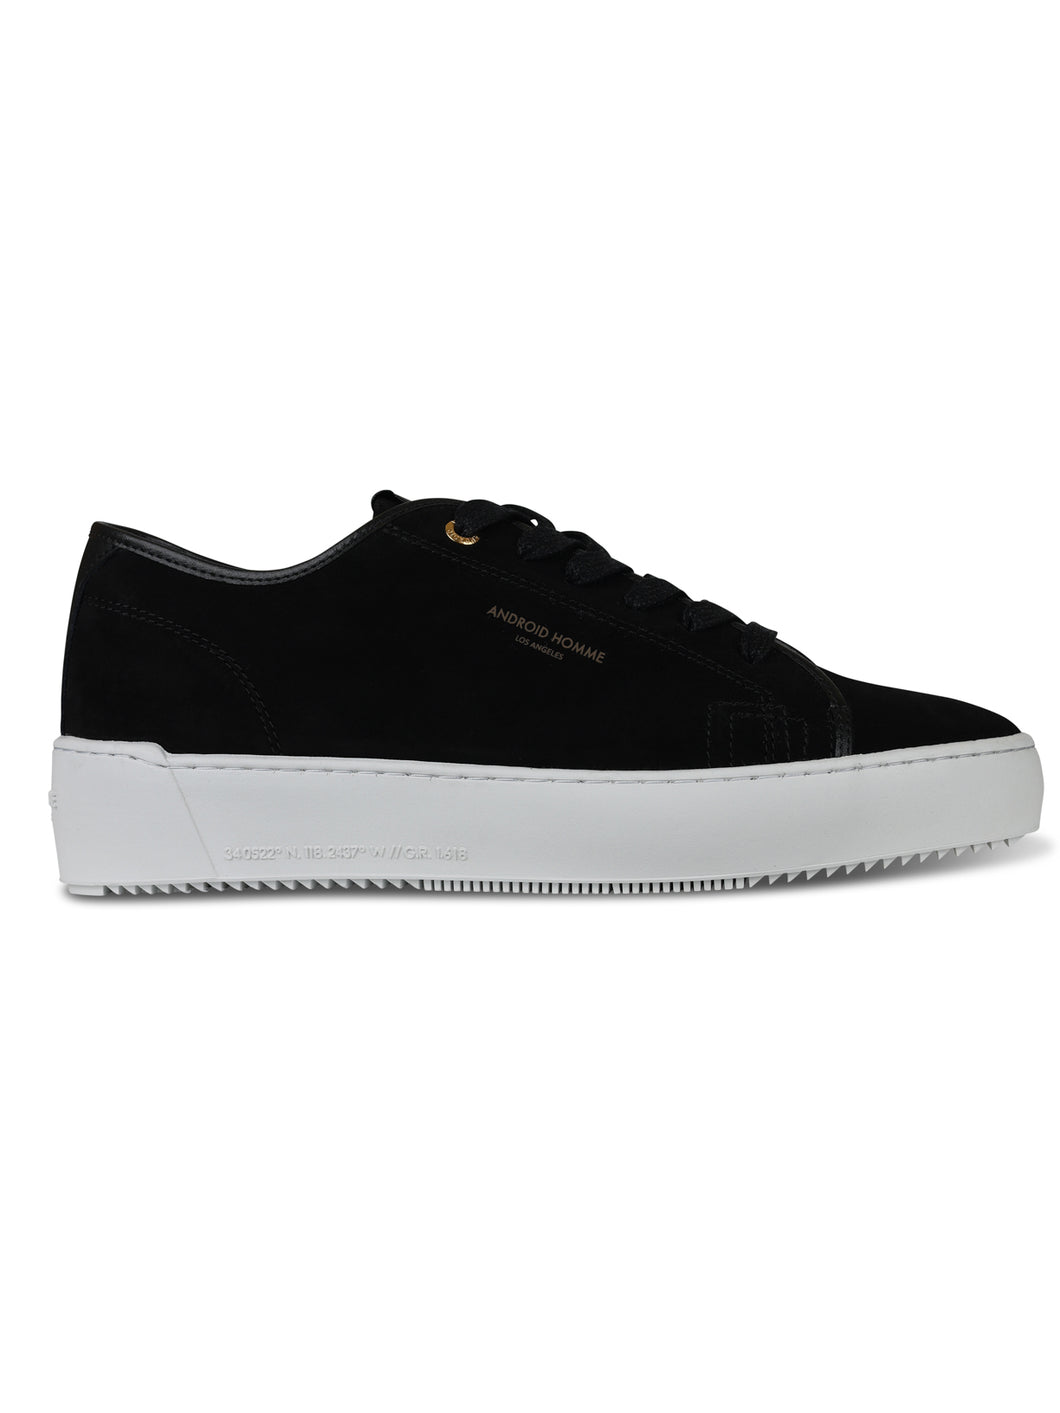 Android Homme Sorrento Suede Black